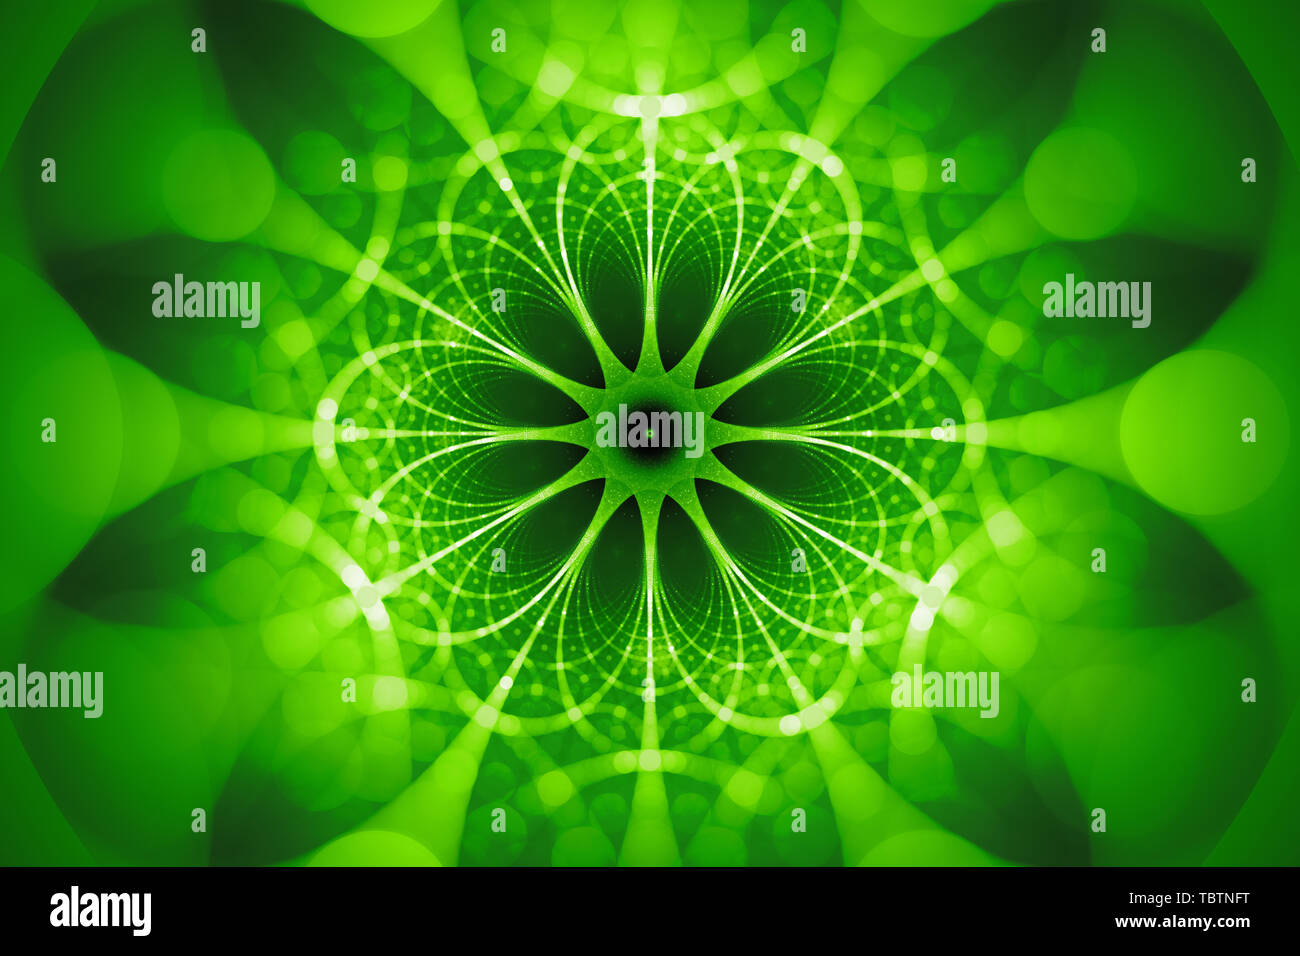 Green glowing network fractal concept, computer generated abstract background, 3D render Stock Photo